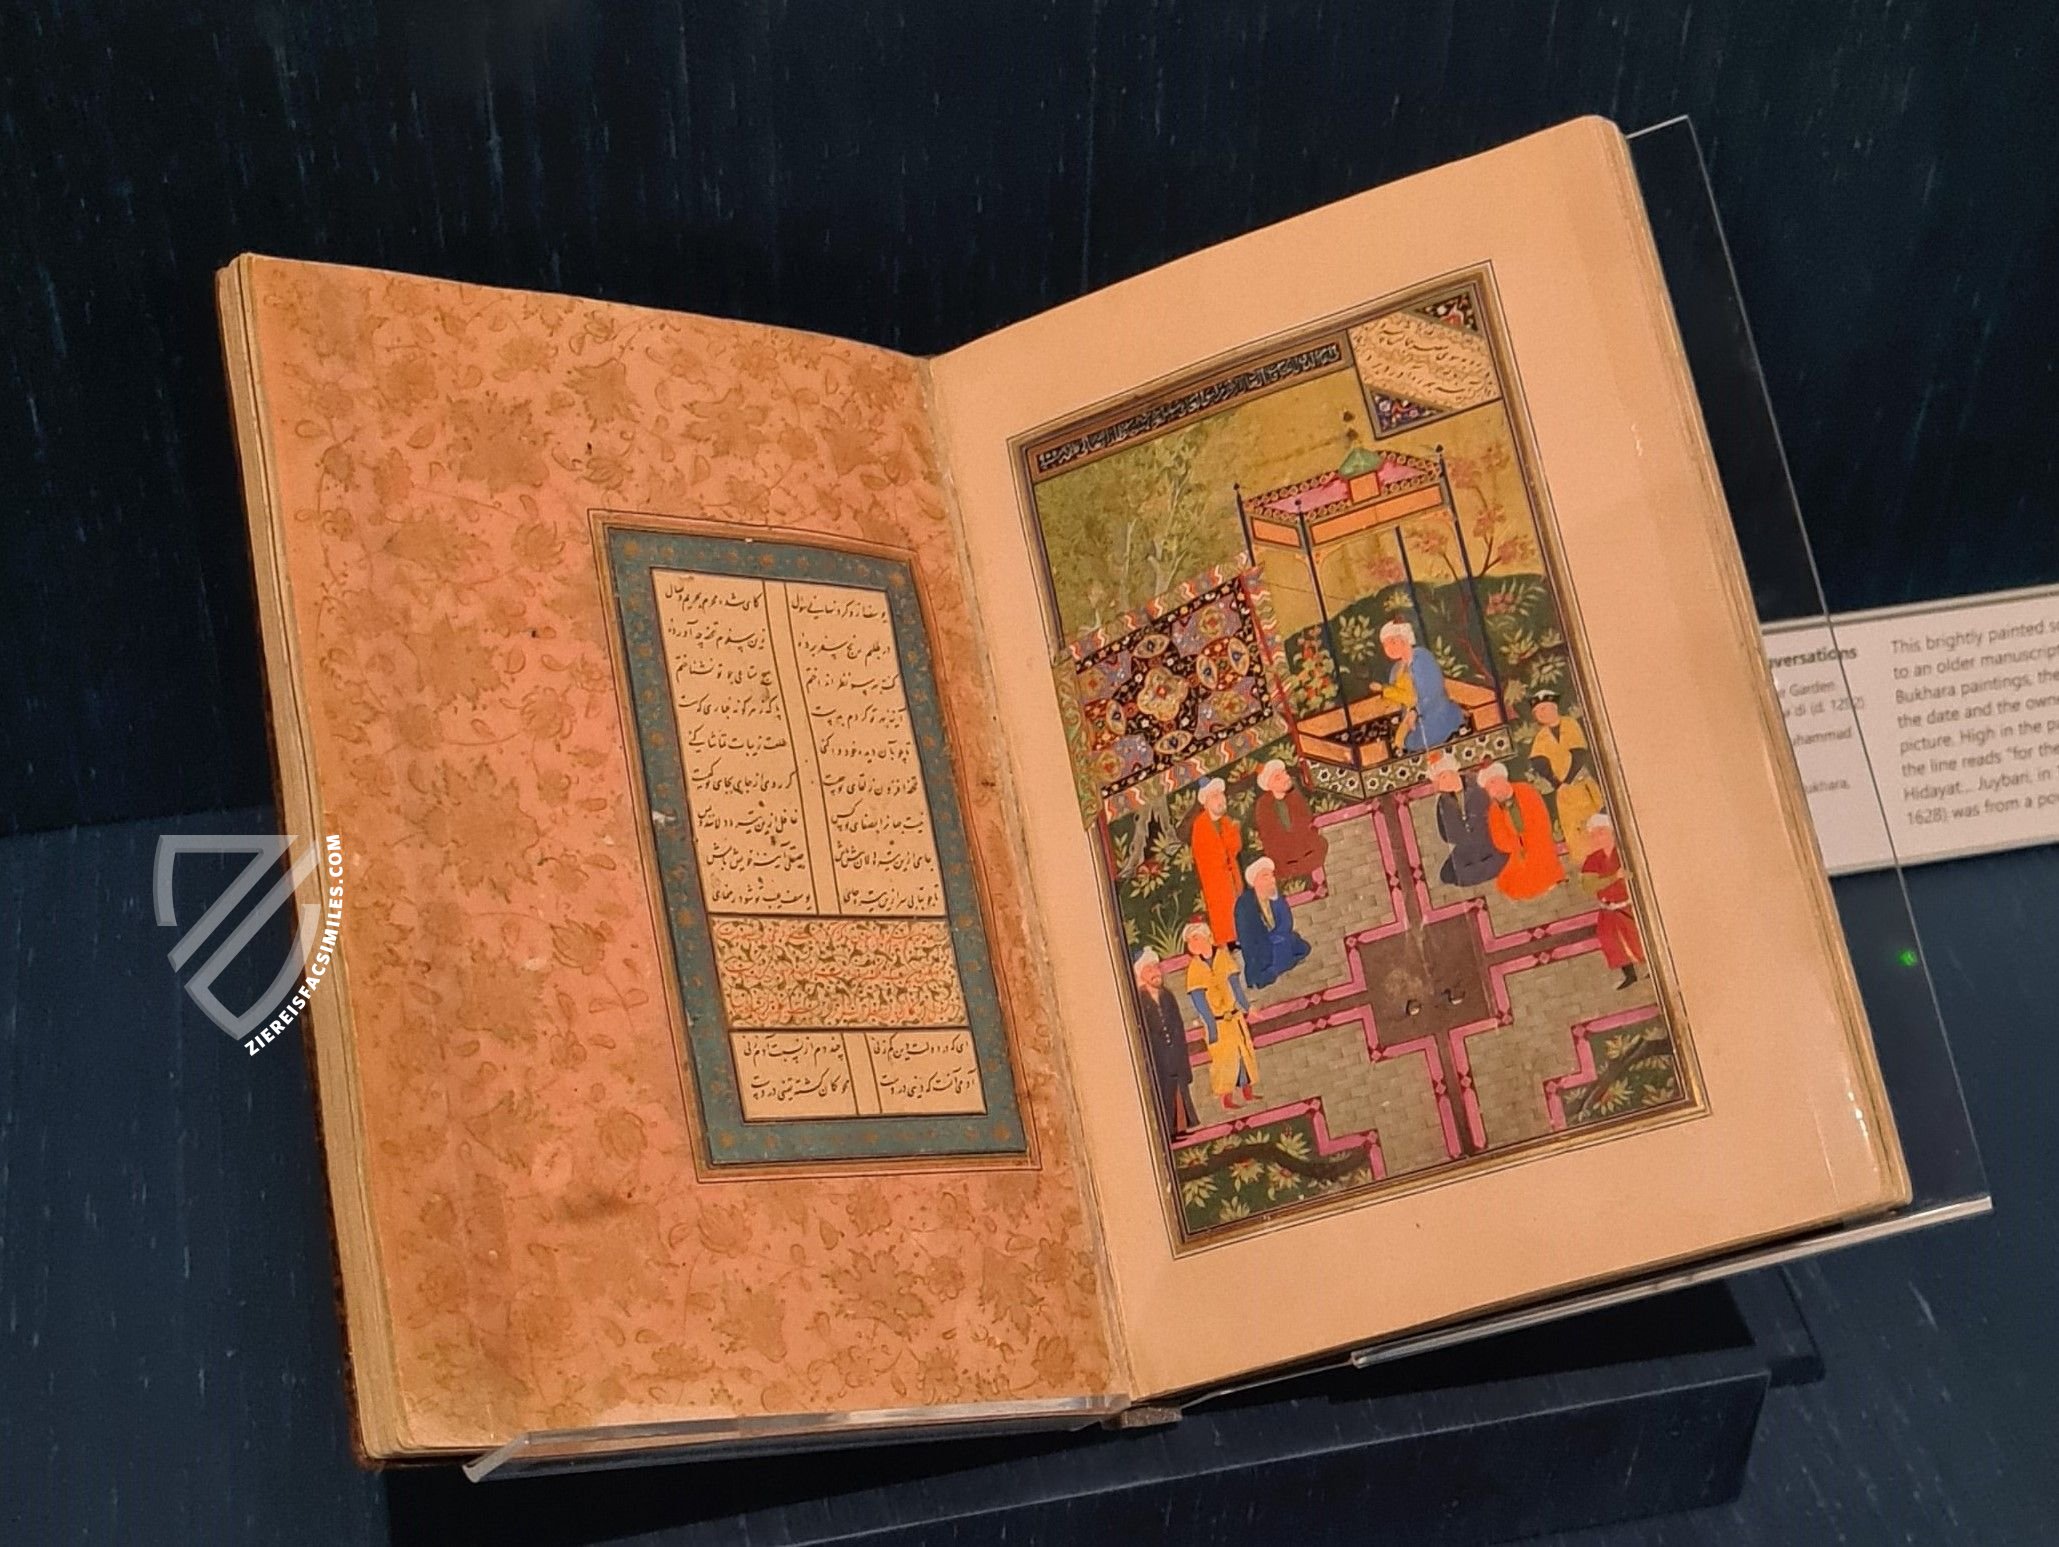 Uzbek manuscript with the story of the prophet Yusuf (Joseph), who escapes from slavery in Egypt